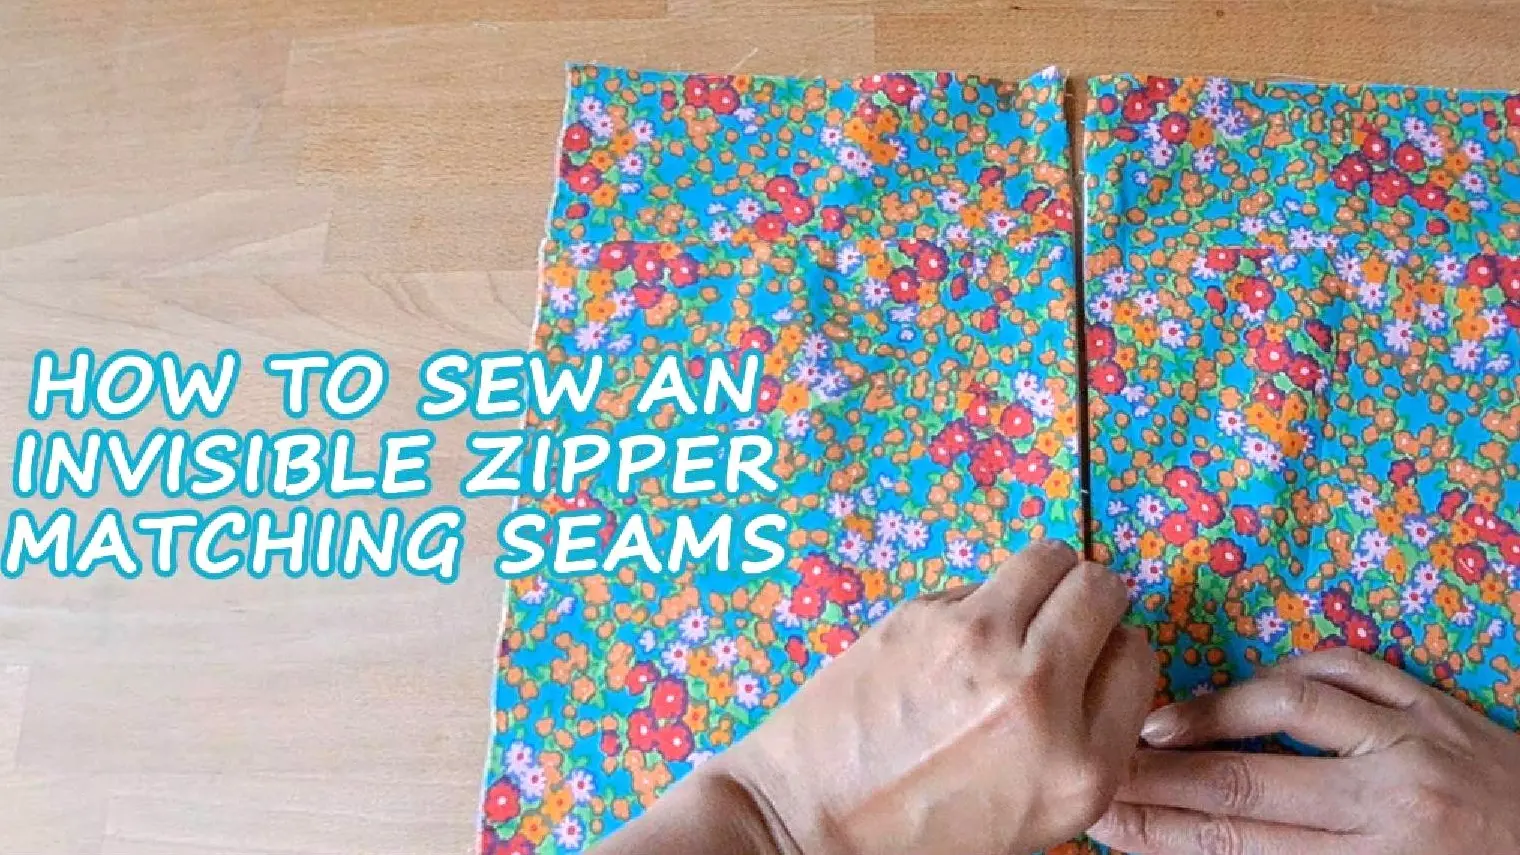 HOW TO SEW AN INVISIBLE ZIPPER